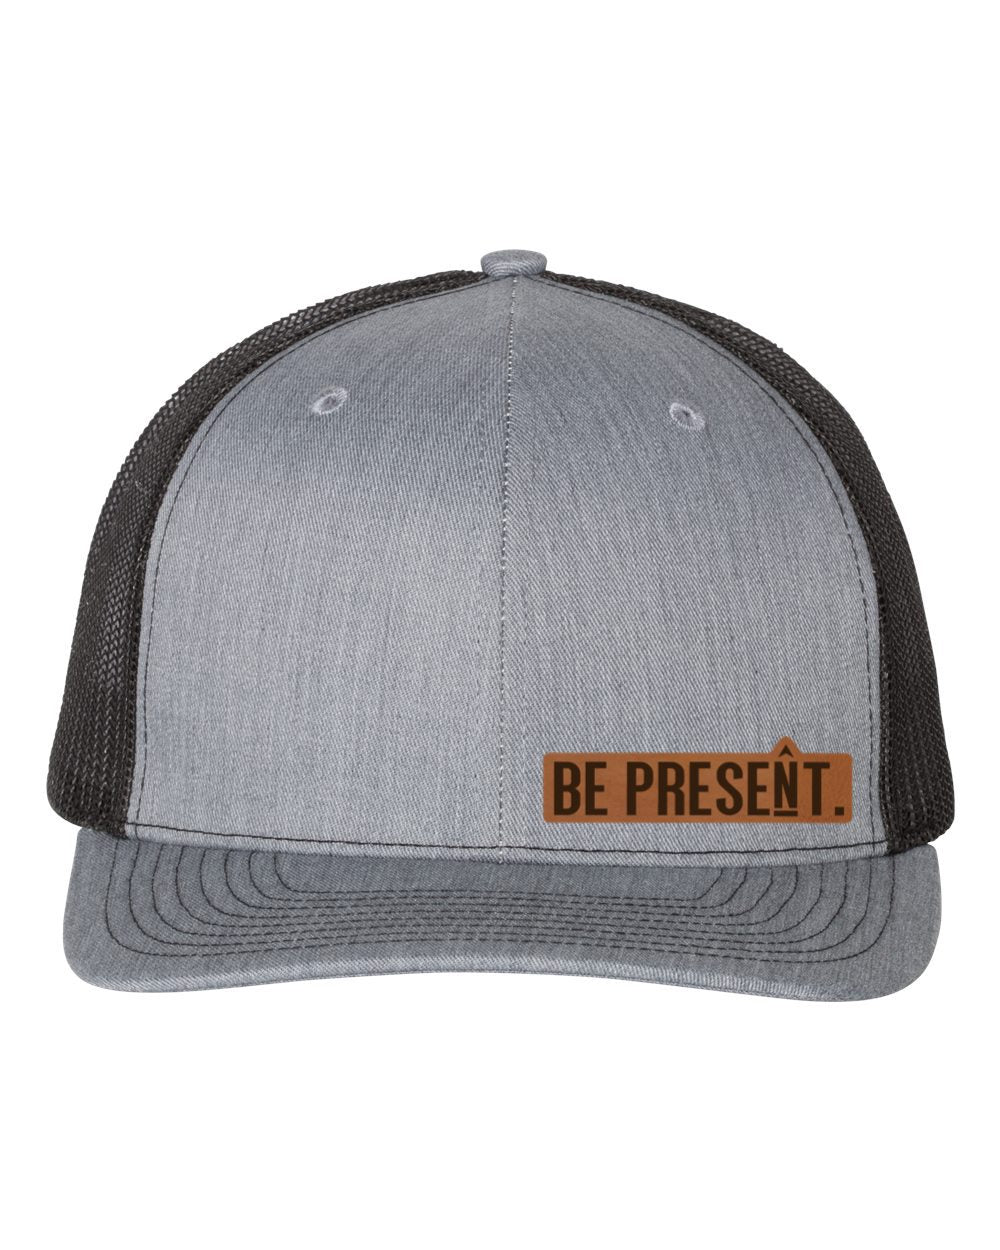 BE PRESENT. Leather Patch Hat - The Wanderheart Project